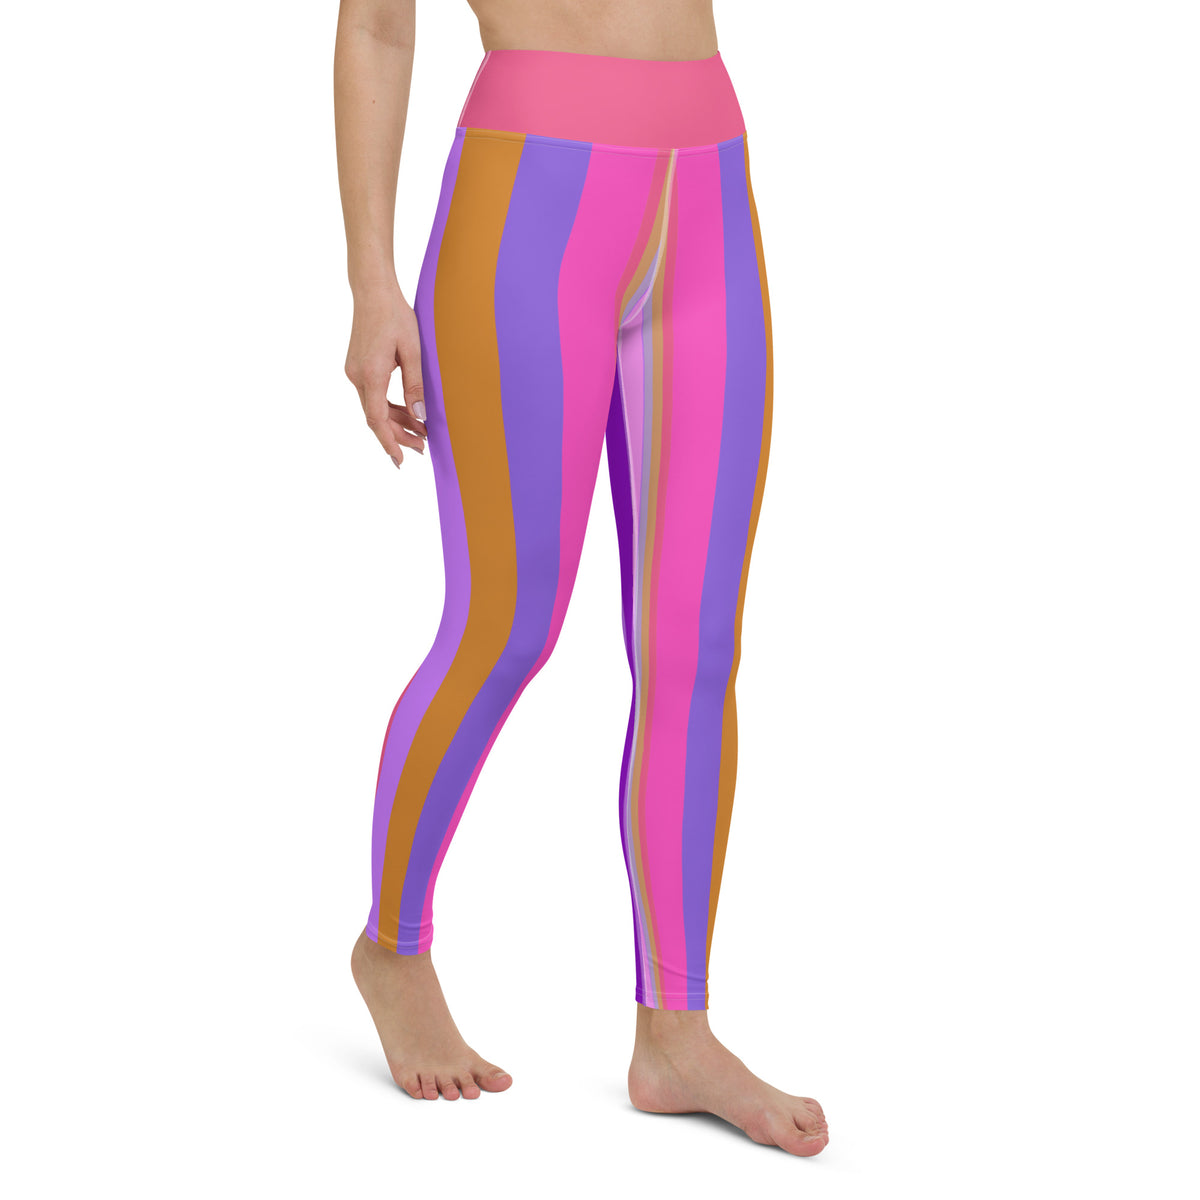 Luminous Galaxy Yoga Leggings with a vibrant cosmic print, inspiring your practice with the beauty of the universe.